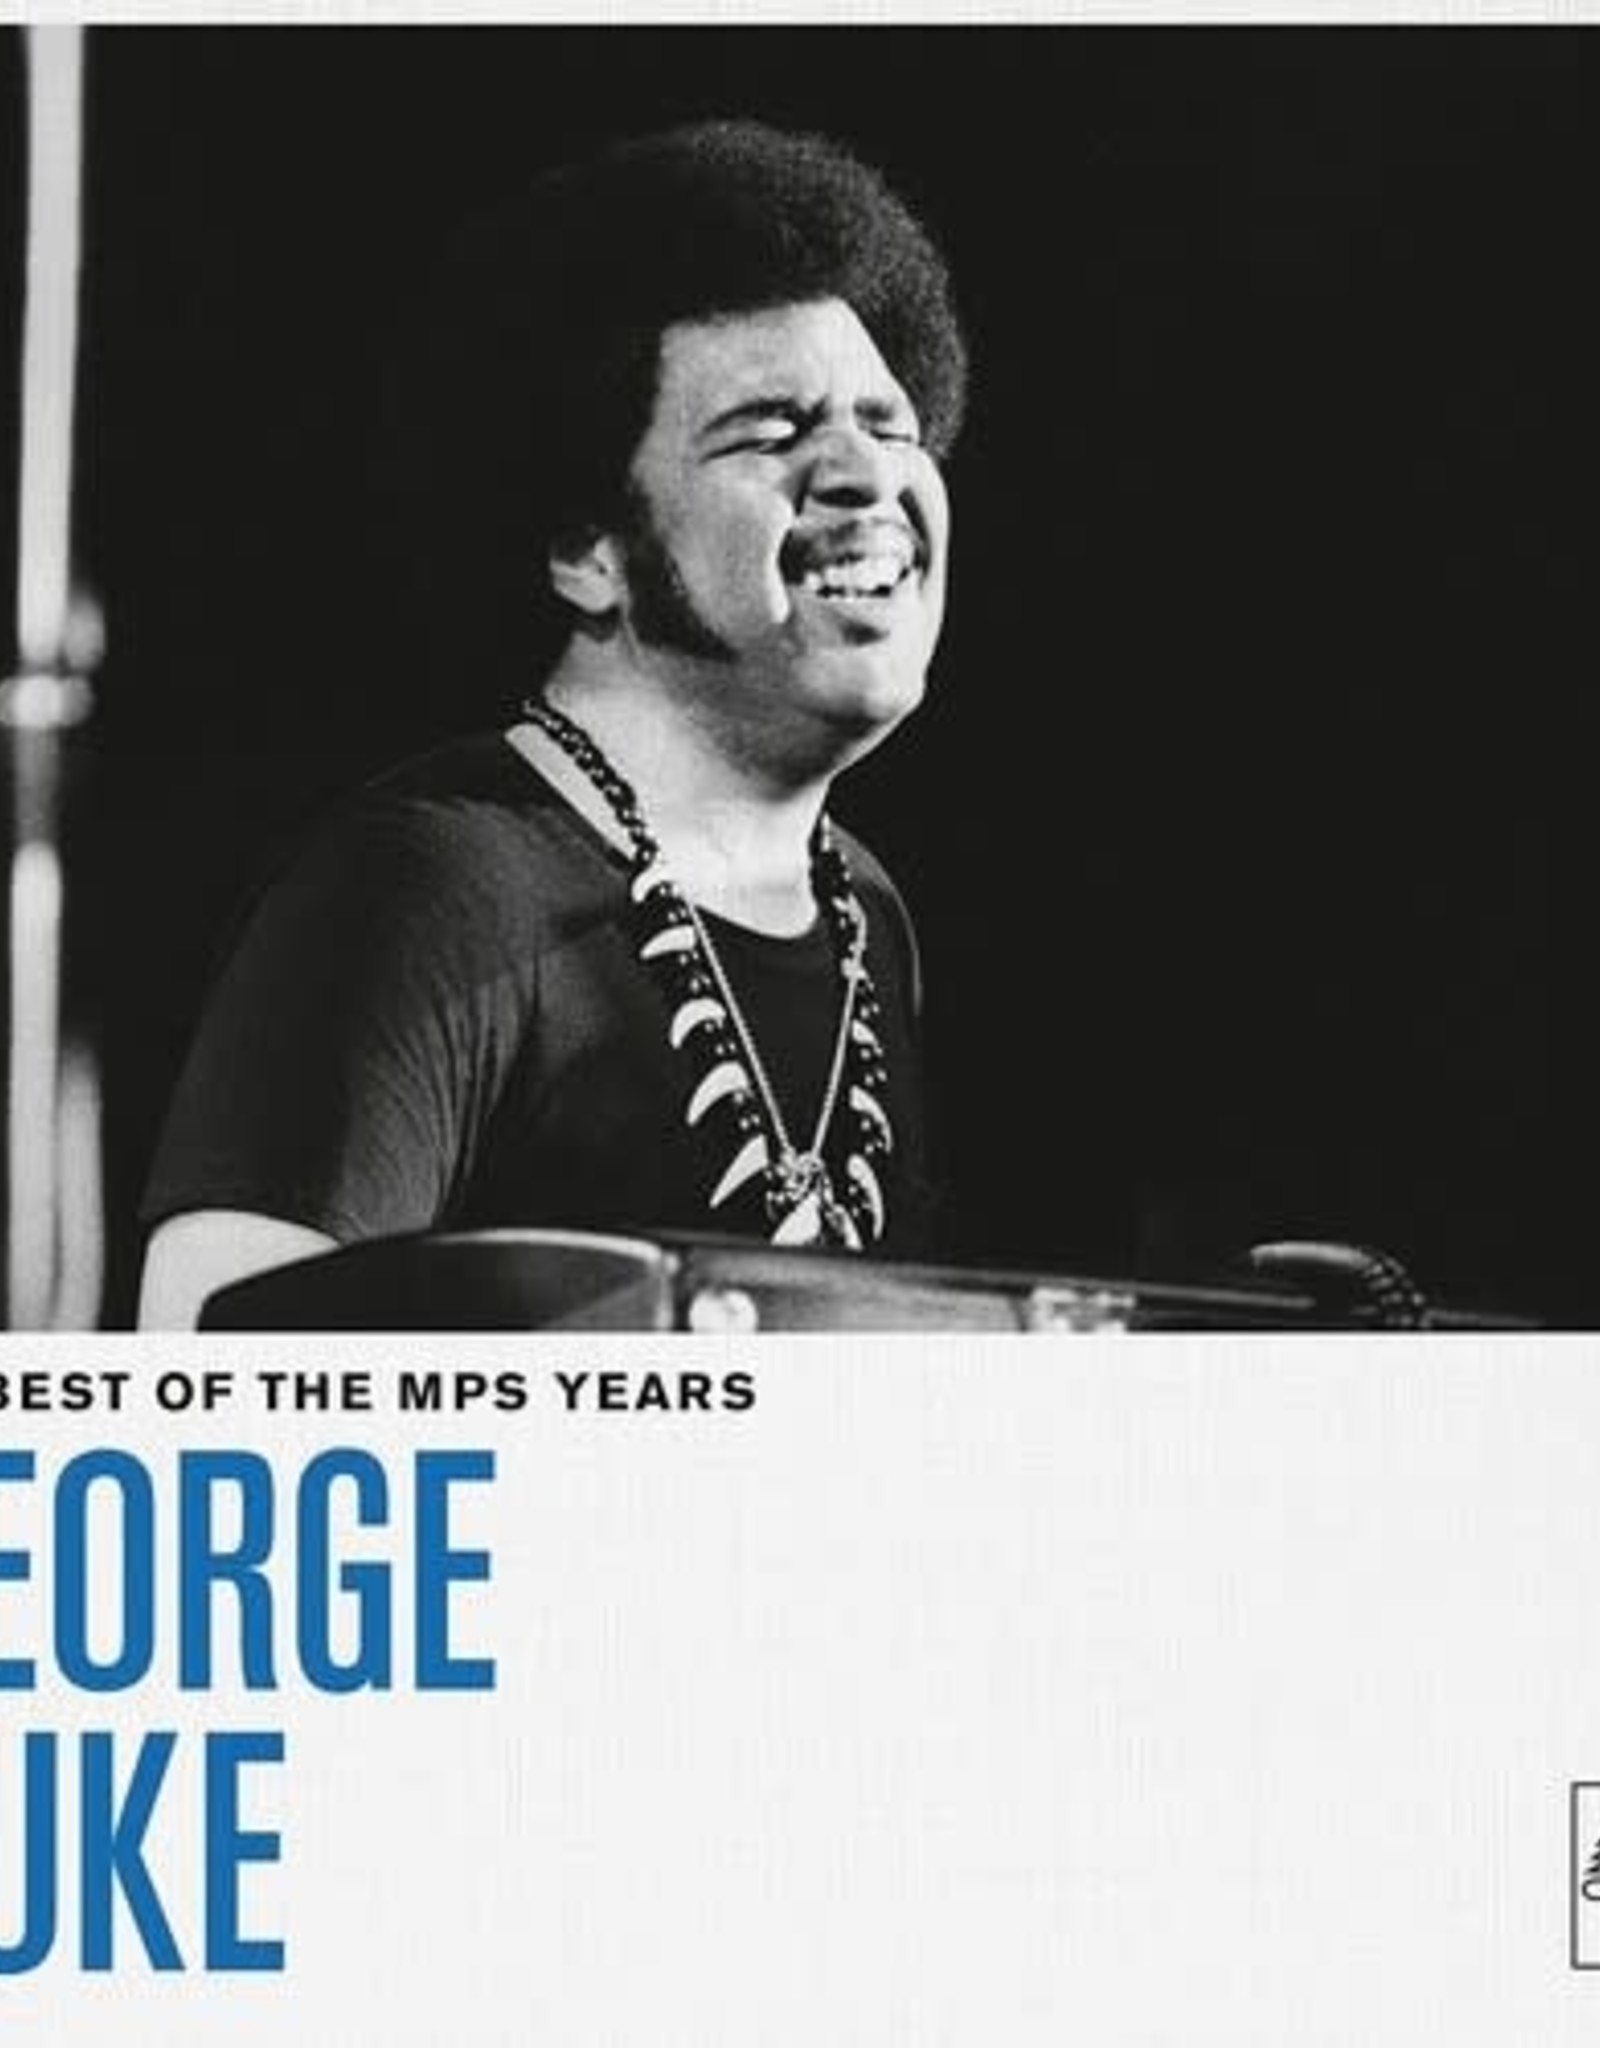 George Duke - The Best Of the MPS Years